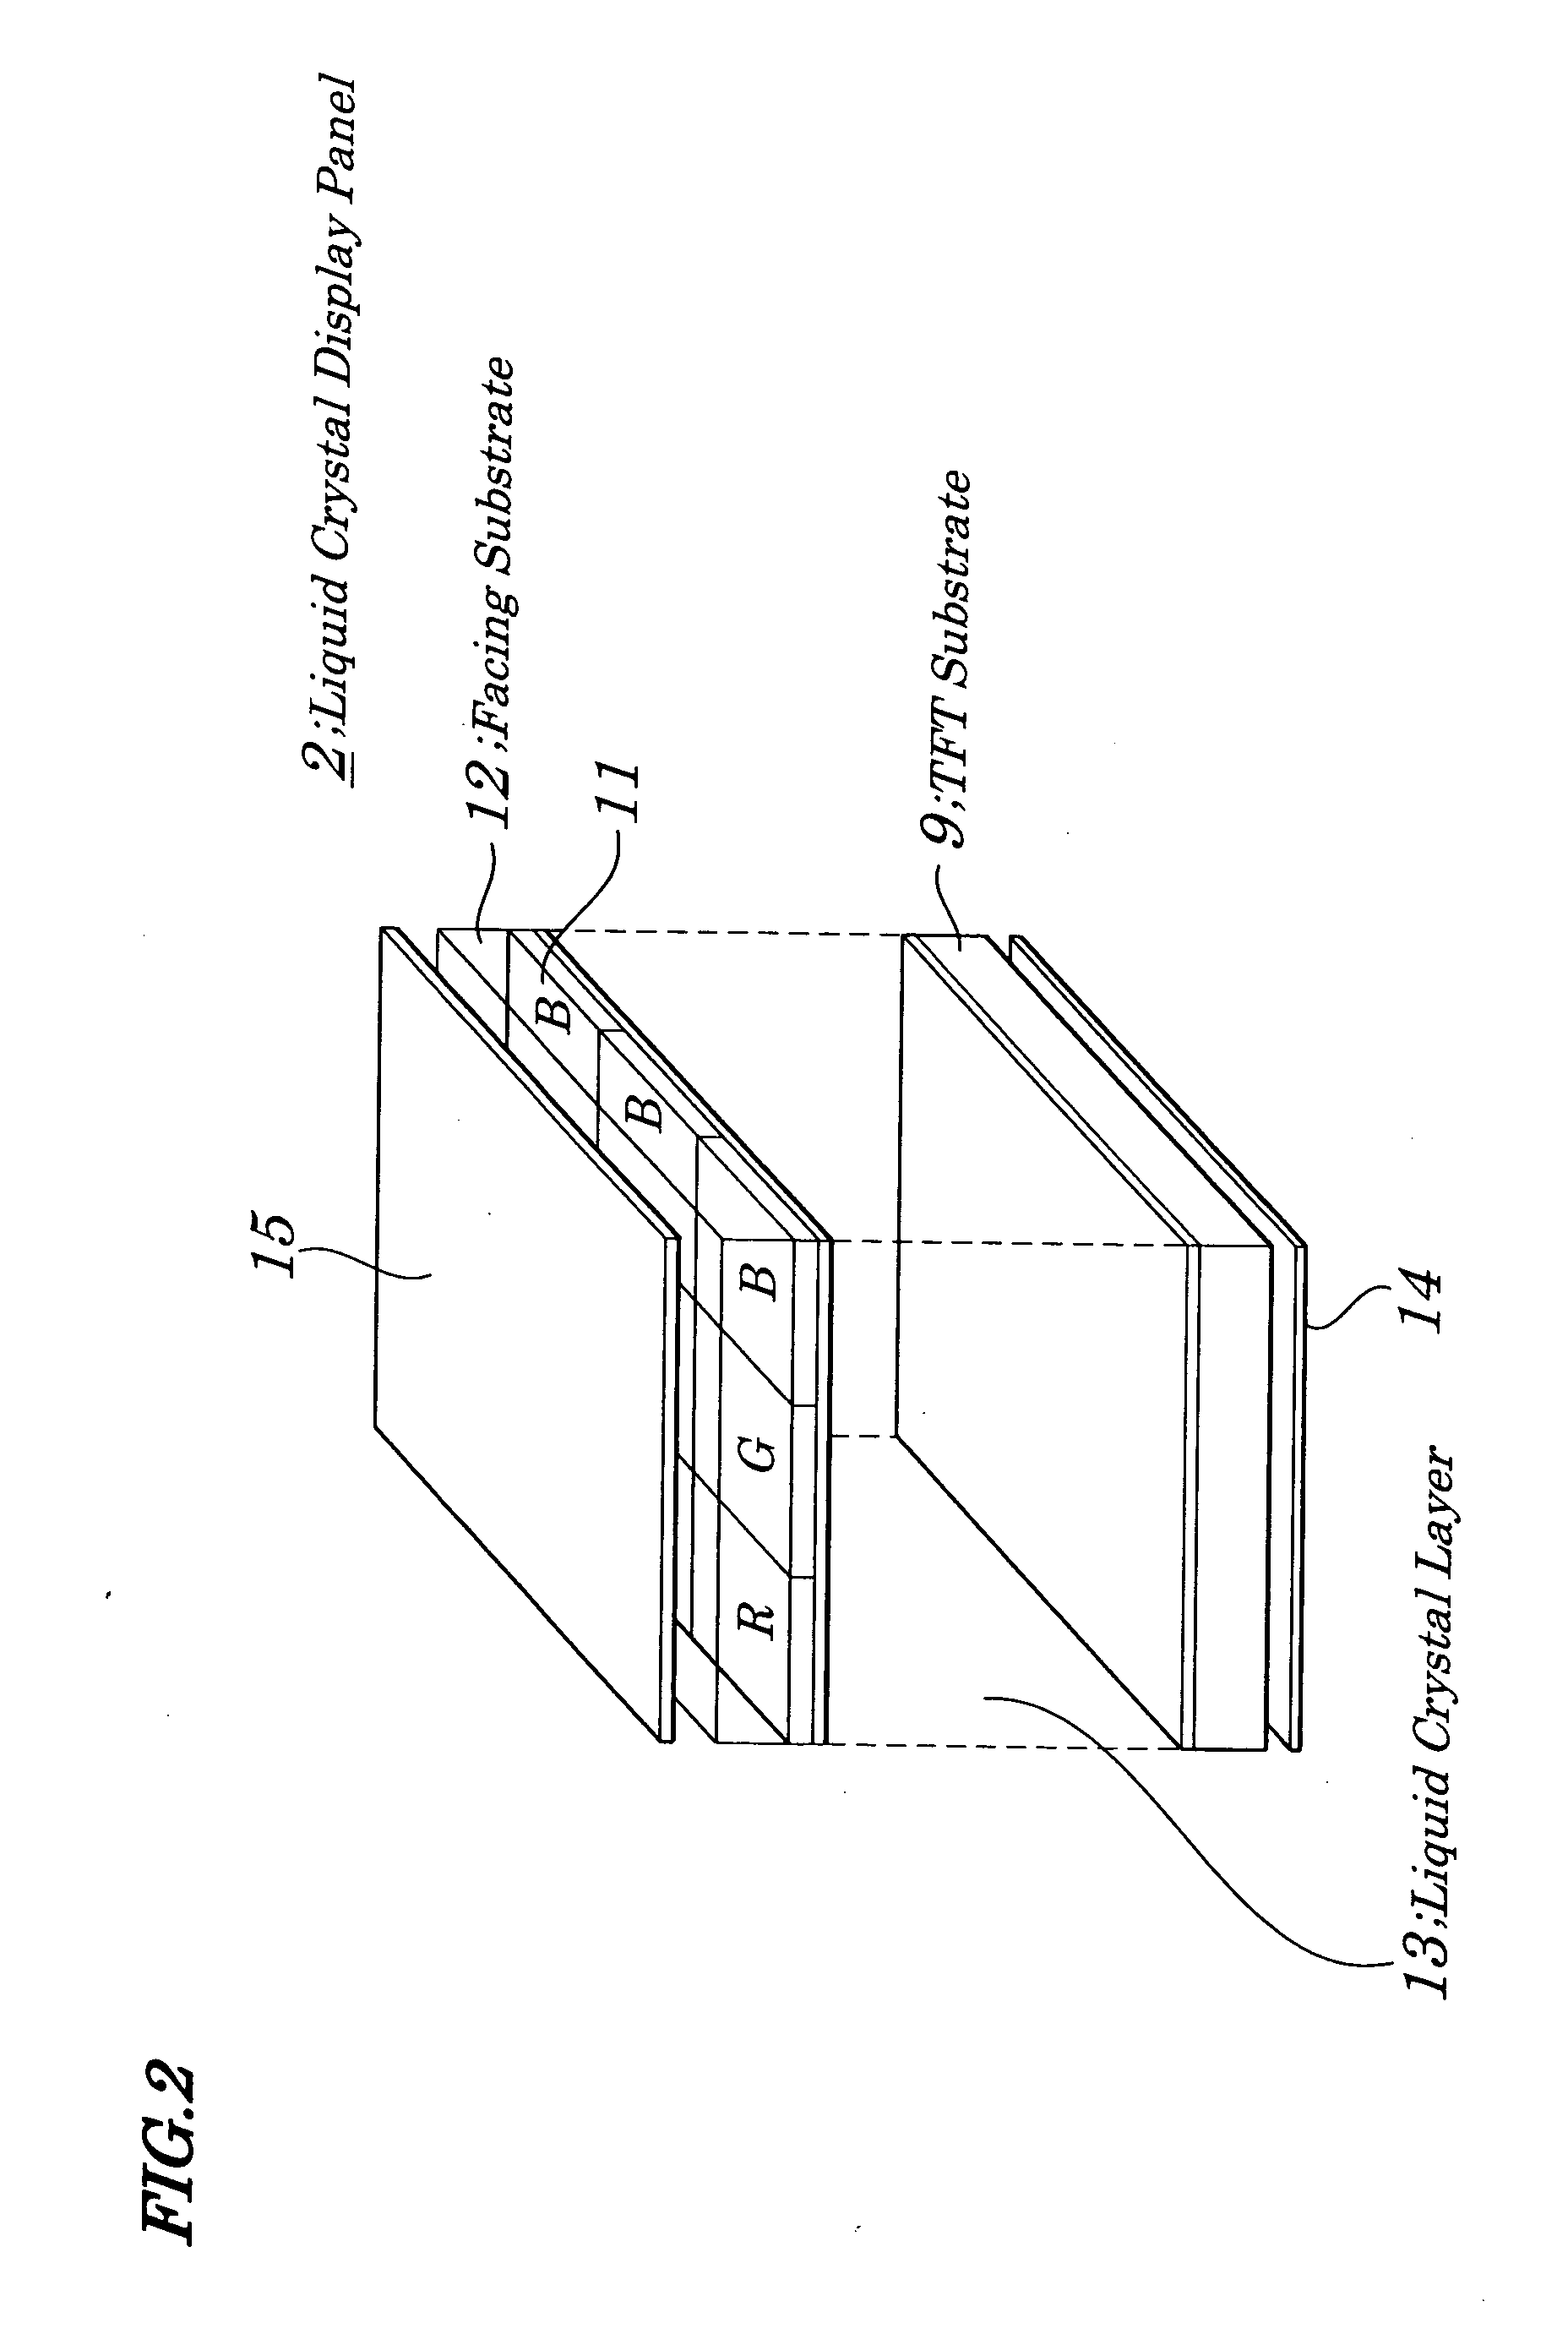 Liquid crystal display device with tablet function